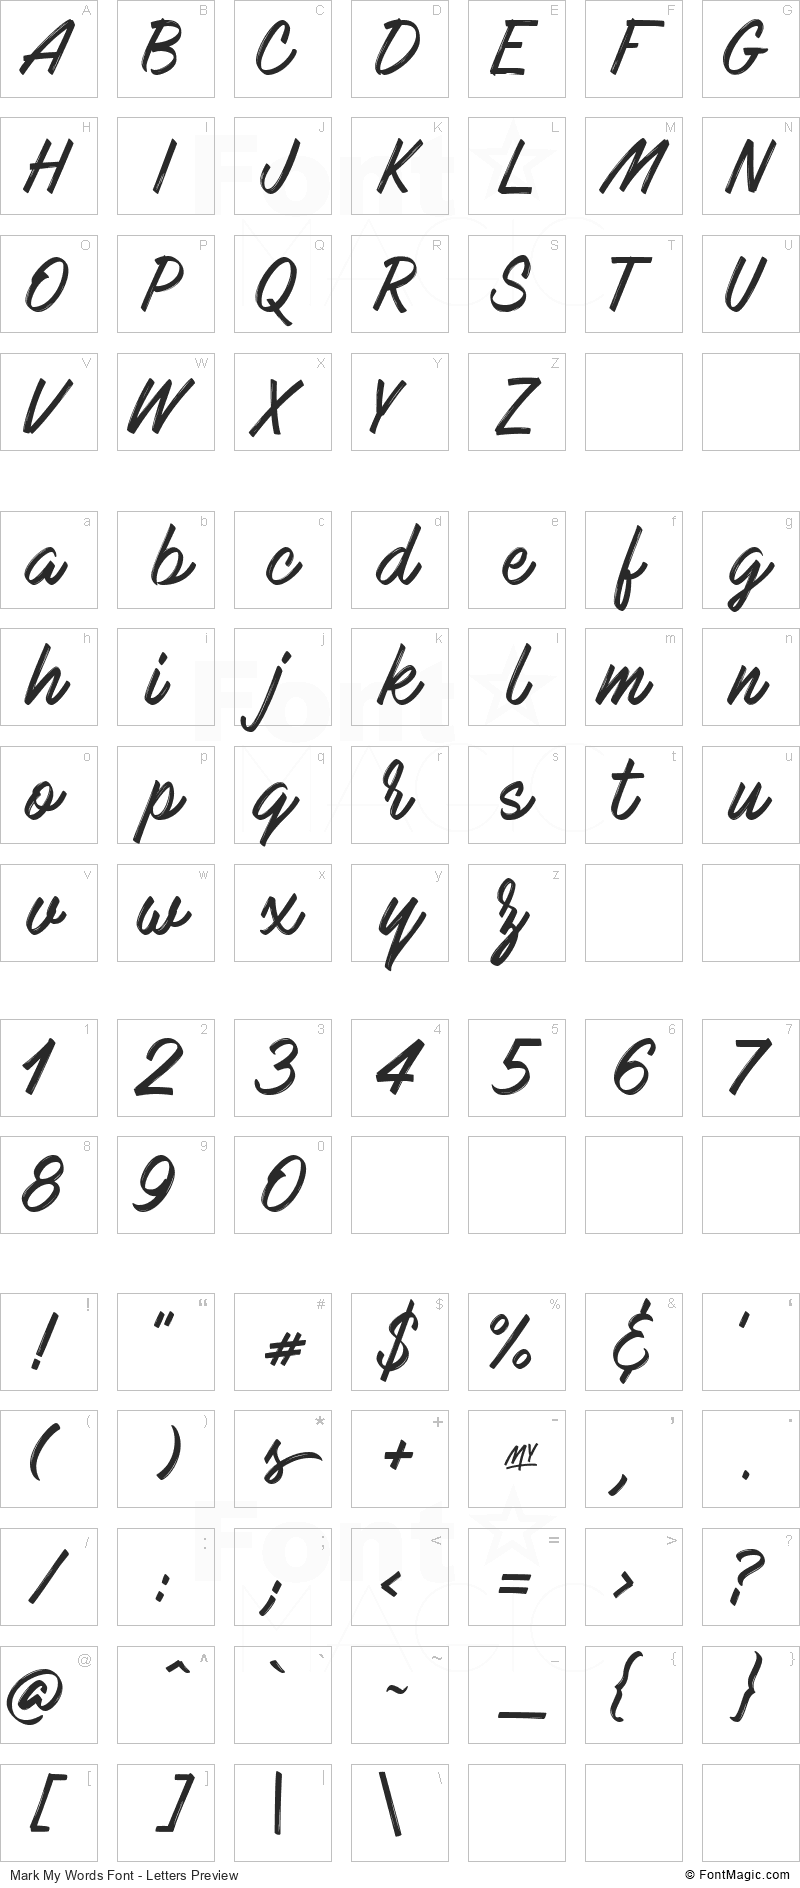 Mark My Words Font - All Latters Preview Chart